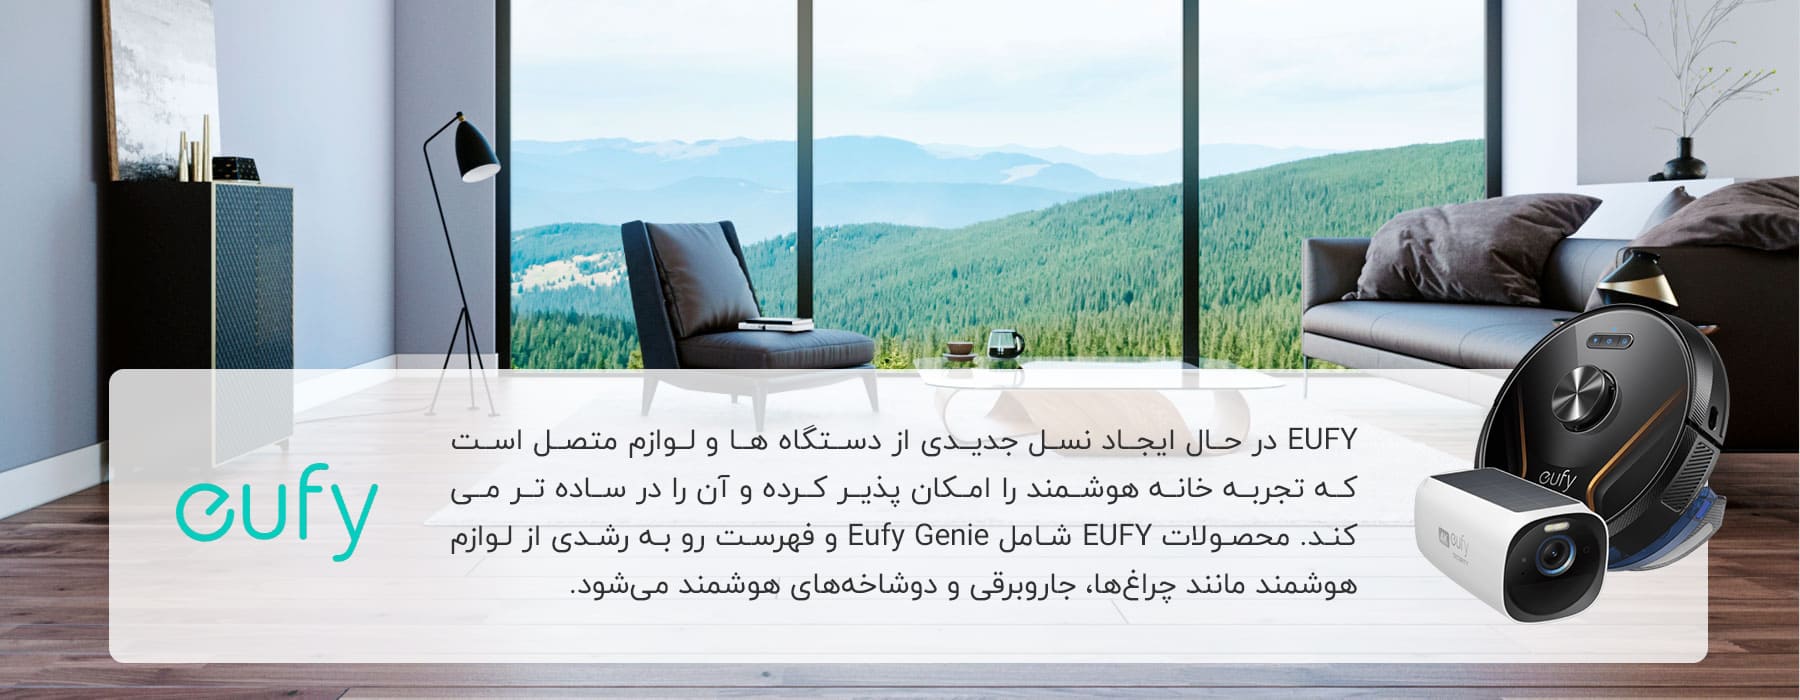 about-eufy-1